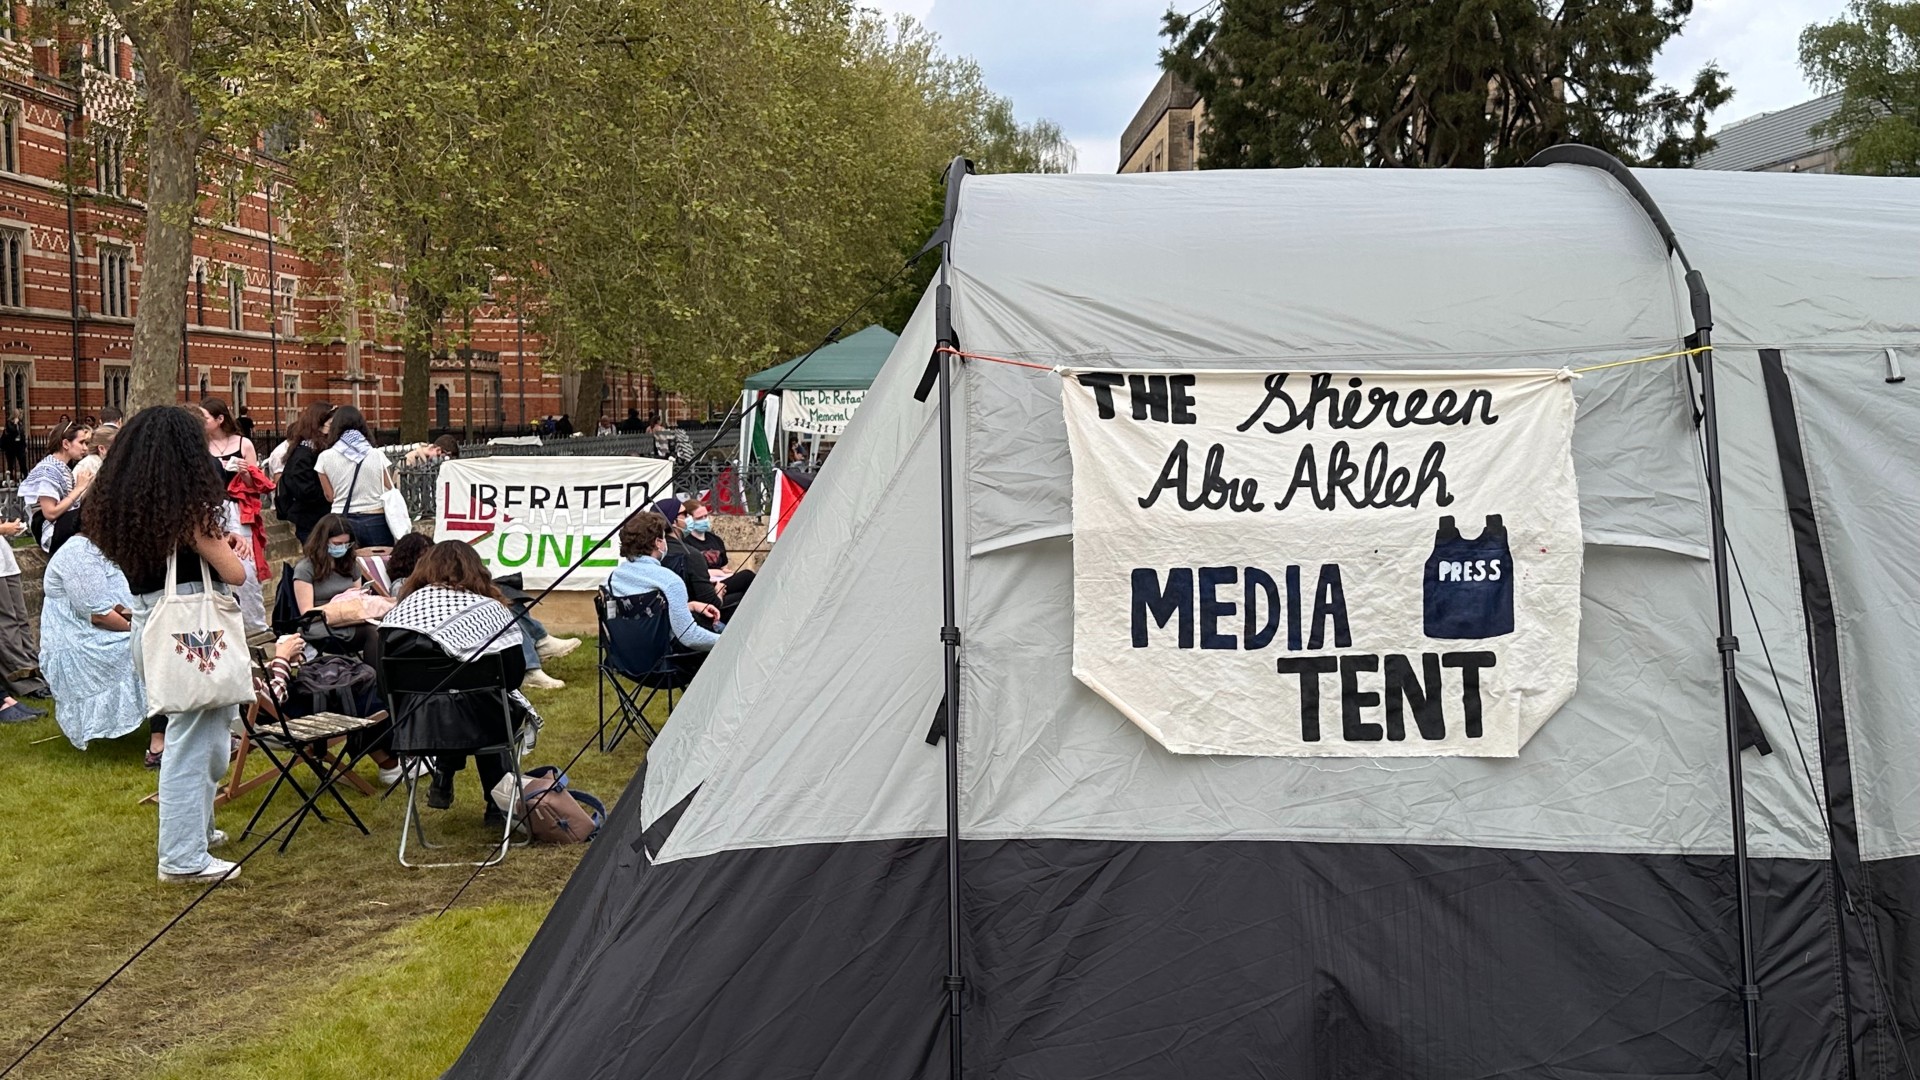 Protesters named their media tent after Shireen Abu-Akleh, a veteran Al Jazeera journalist who was killed by Israeli soldiers in the occupied West Bank in 2022 (Mohammad Saleh/MEE)